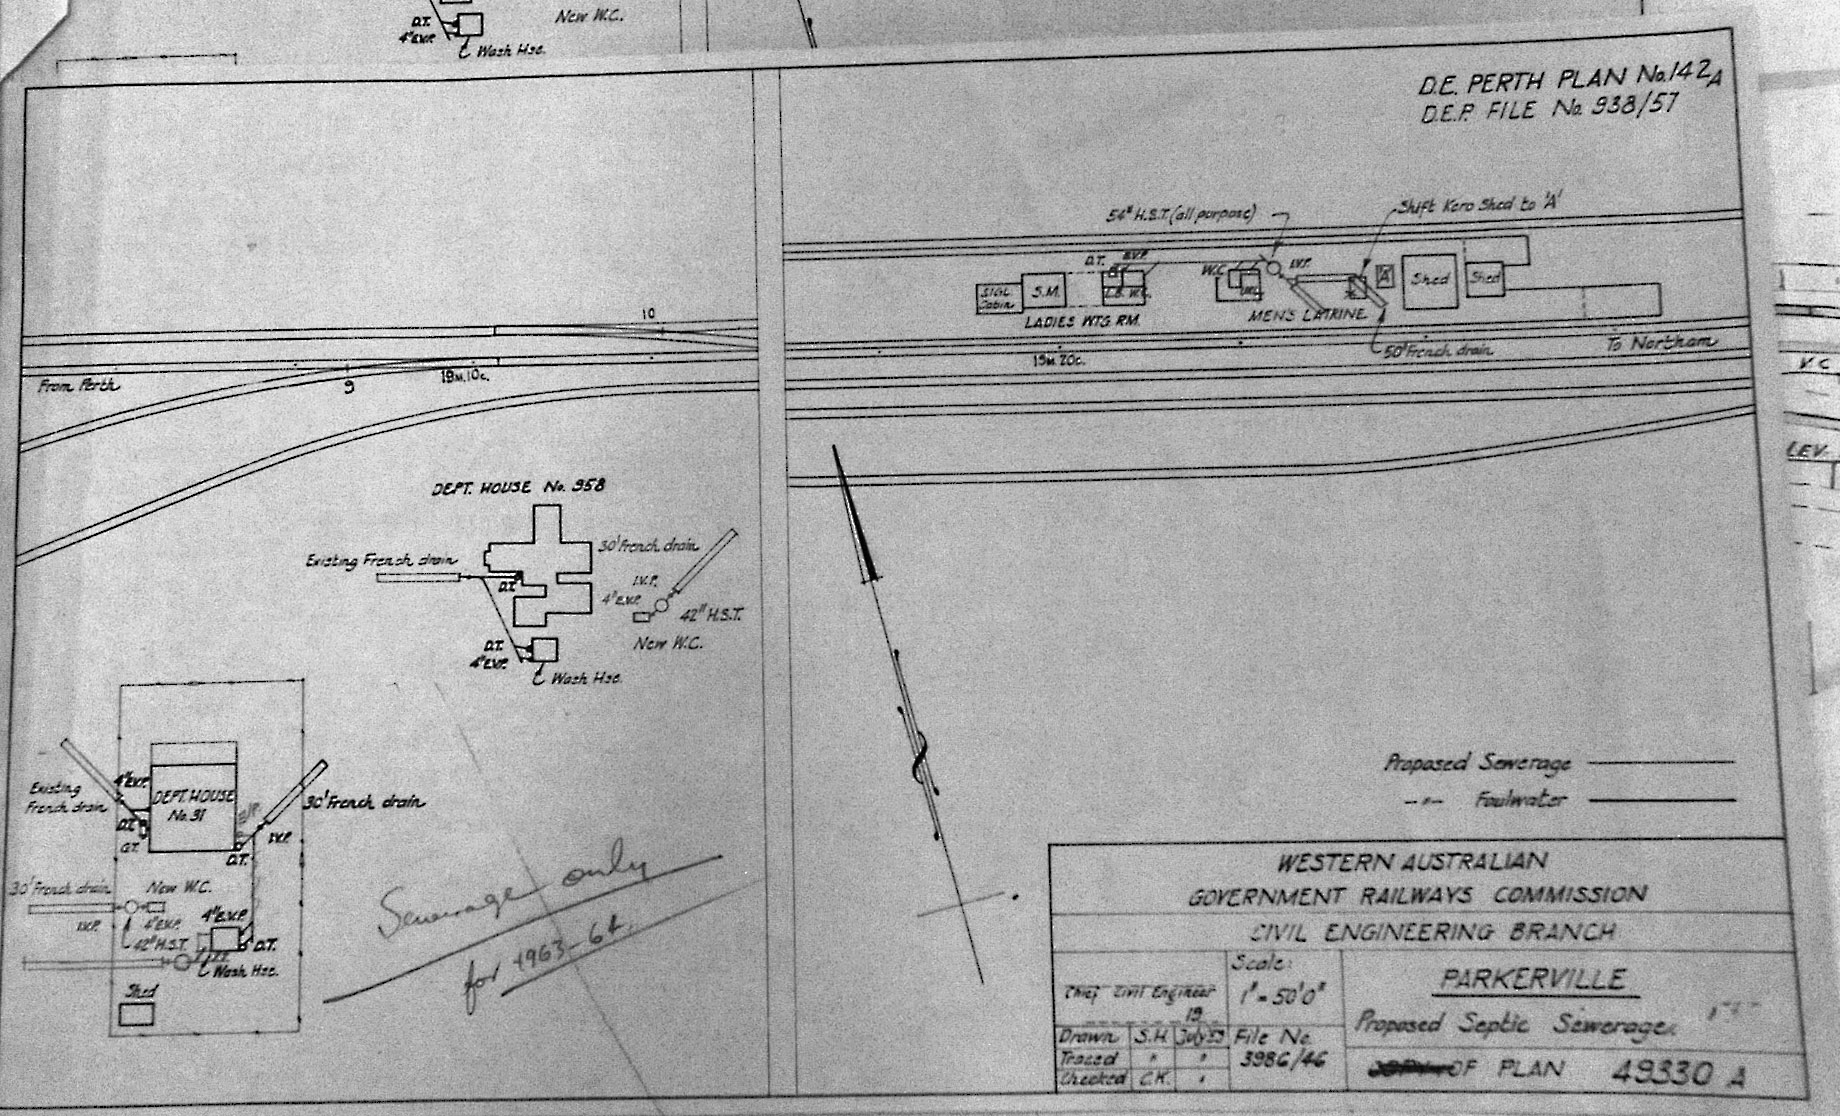 Plan of the Parkerville Railway station grounds.